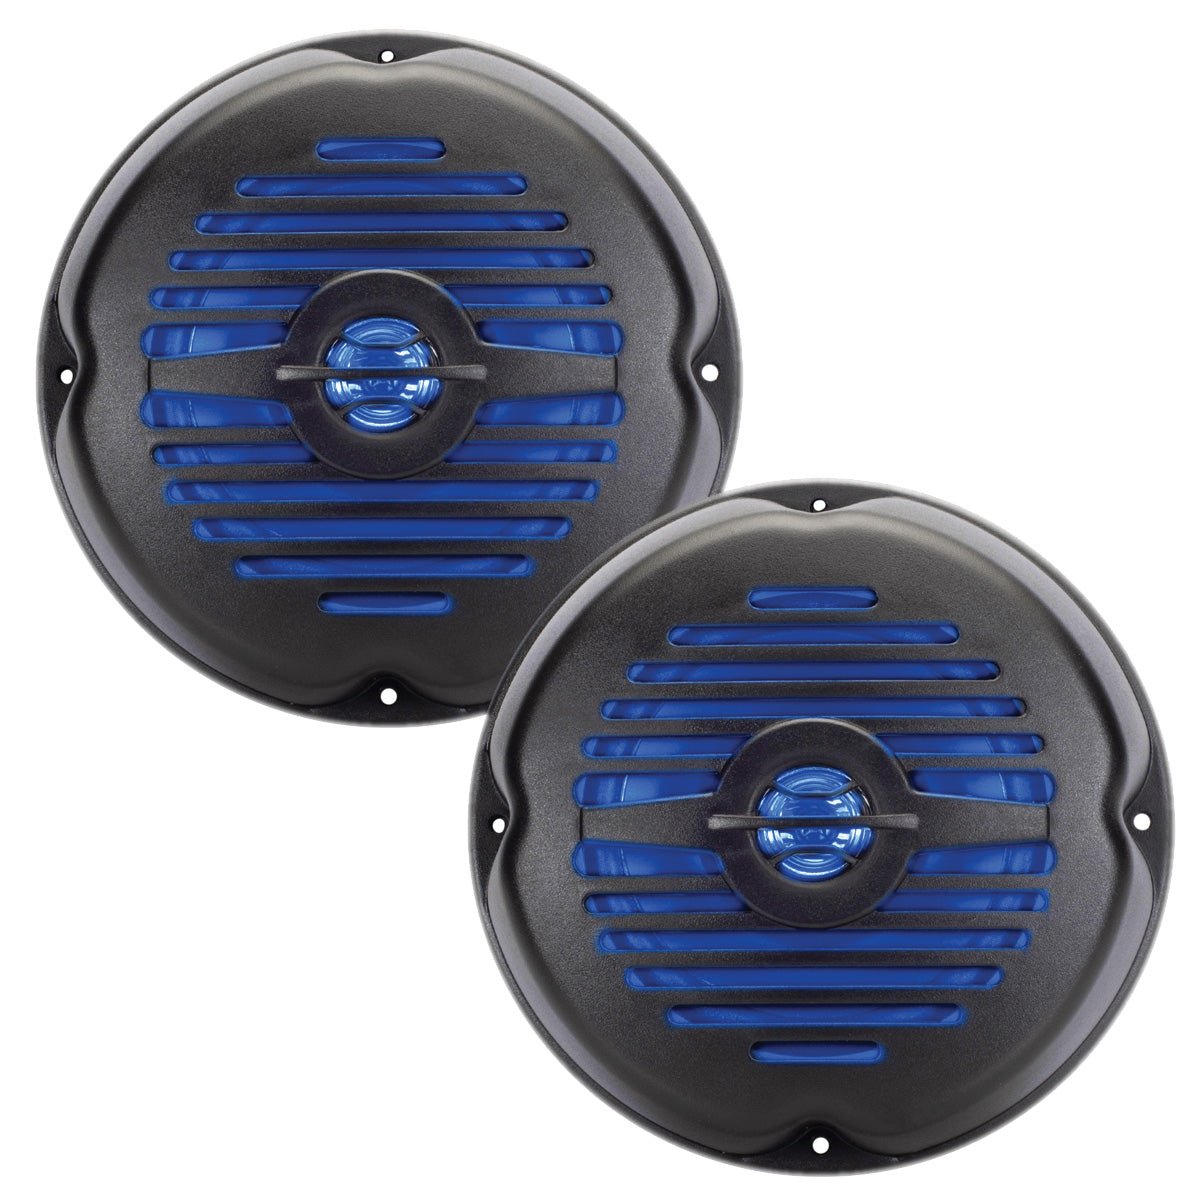 Magnadyne WR58B-LED-PR | 5'' Water Resistant Surface Mount Speaker/Grill with LED Lighting | Sold as a Pair - Magnadyne